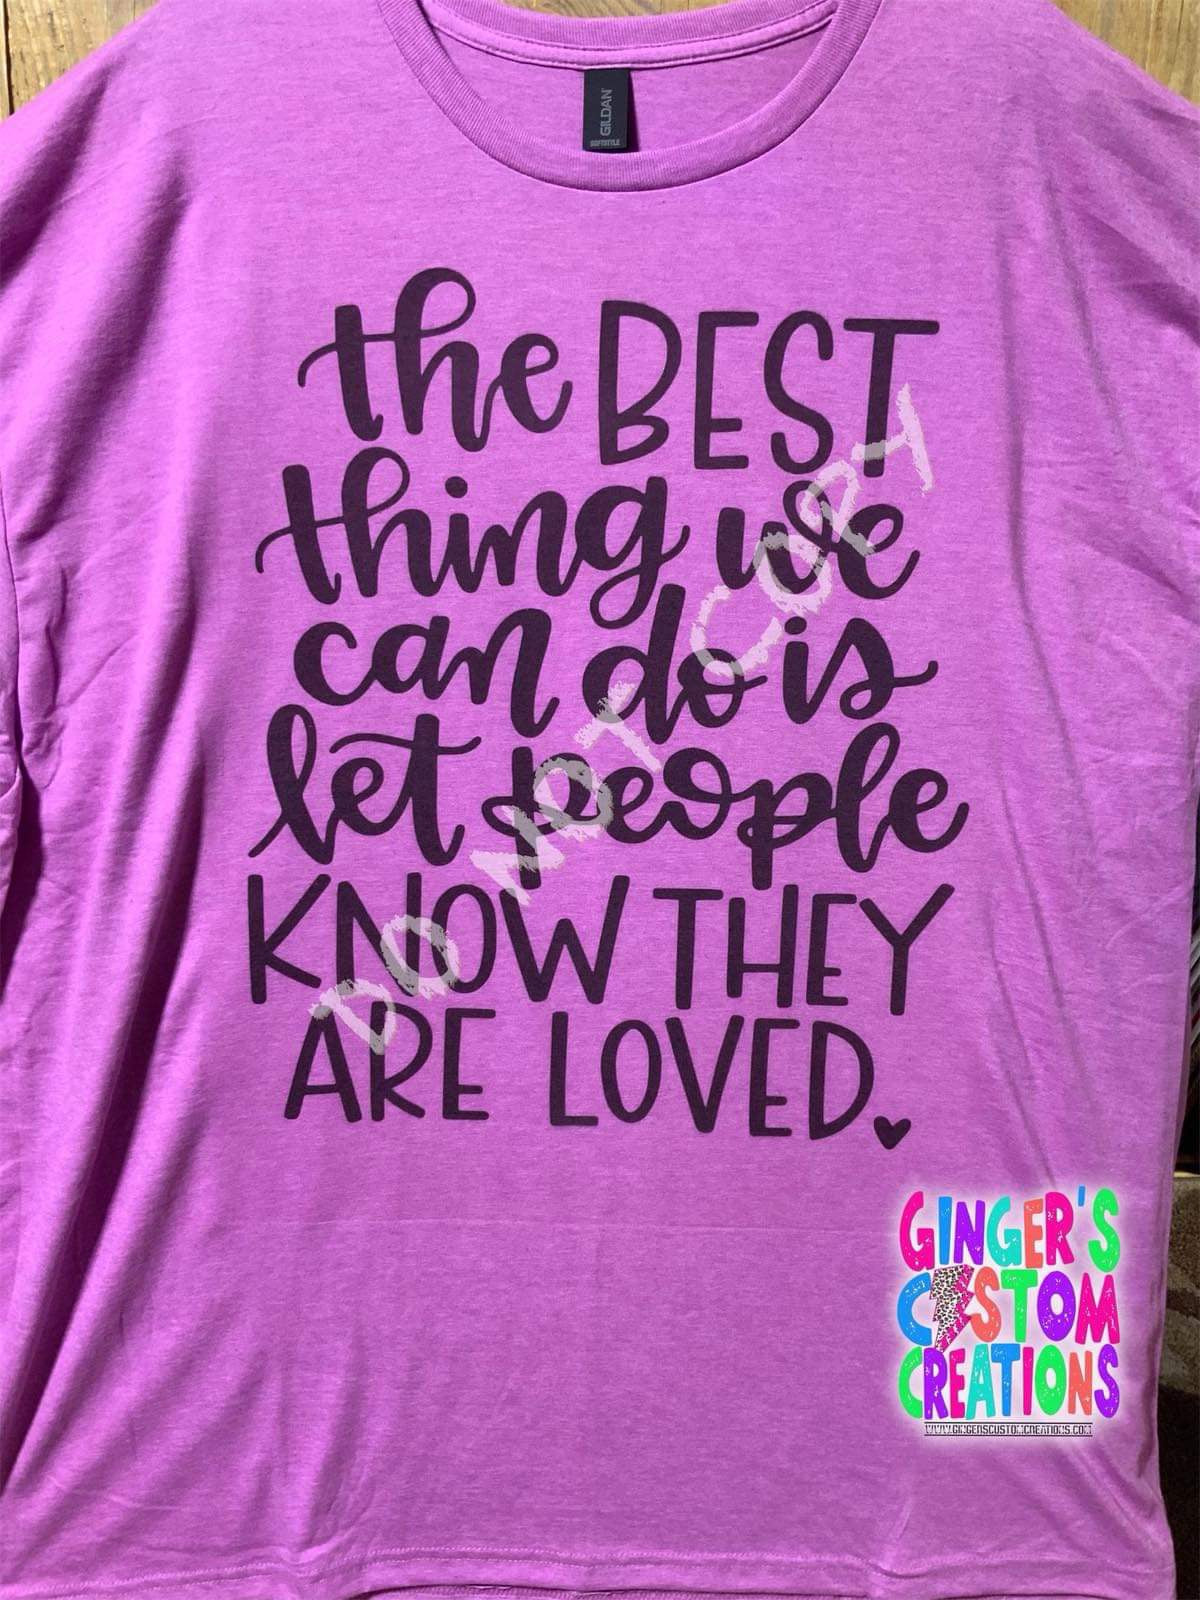 THE BEST THING WE CAN DO IS LET PEOPLE KNOW THEY ARE LOVED SHIRT